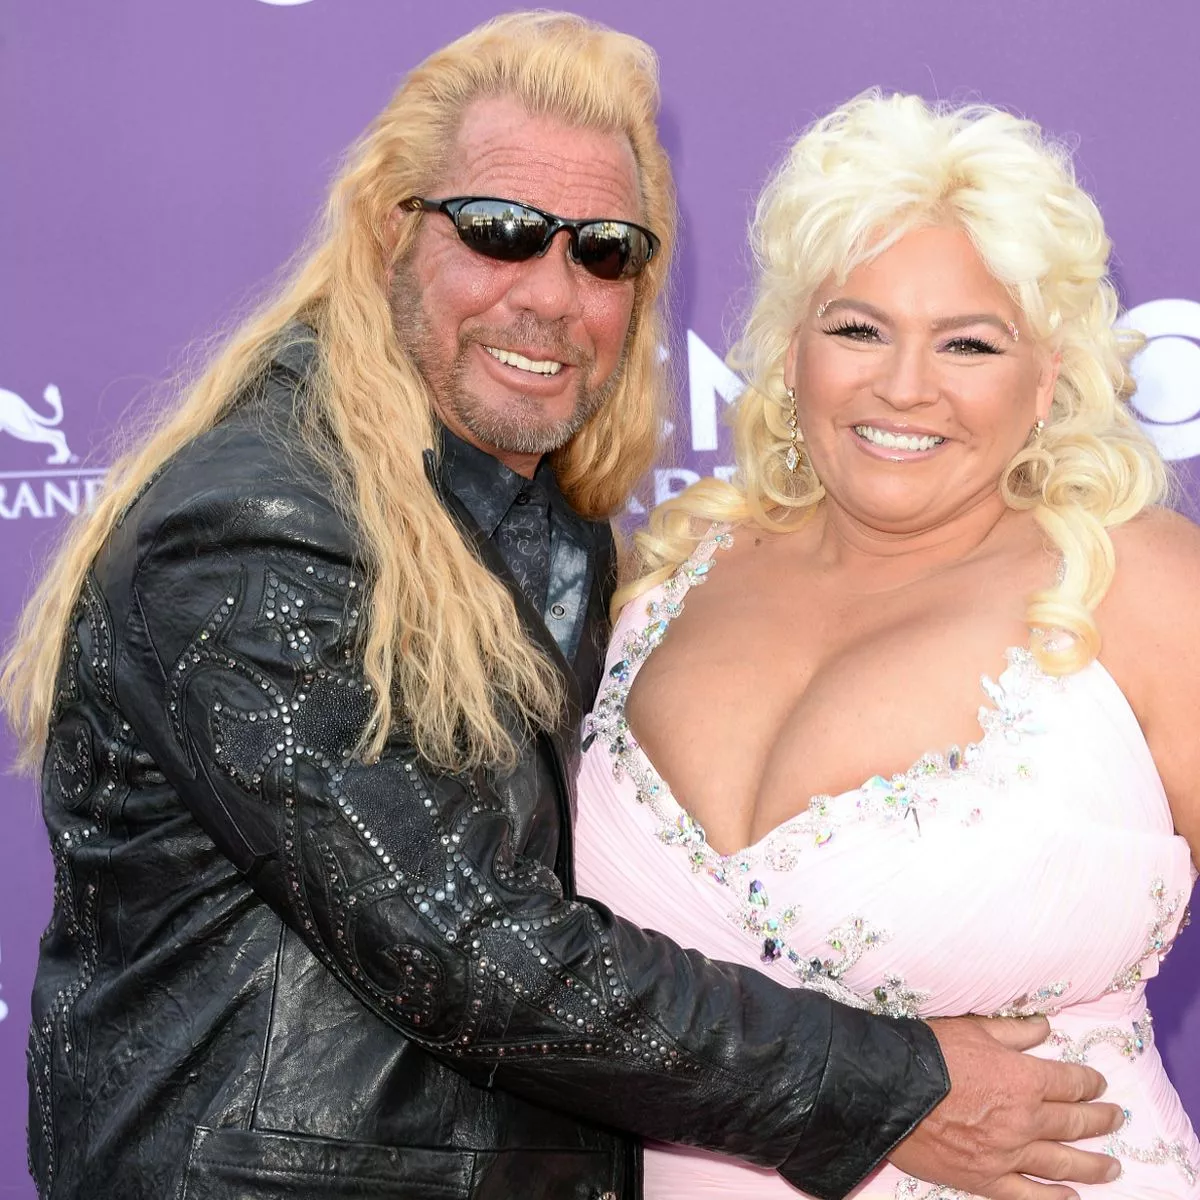 alex lindenberg add beth chapman nude pictures photo